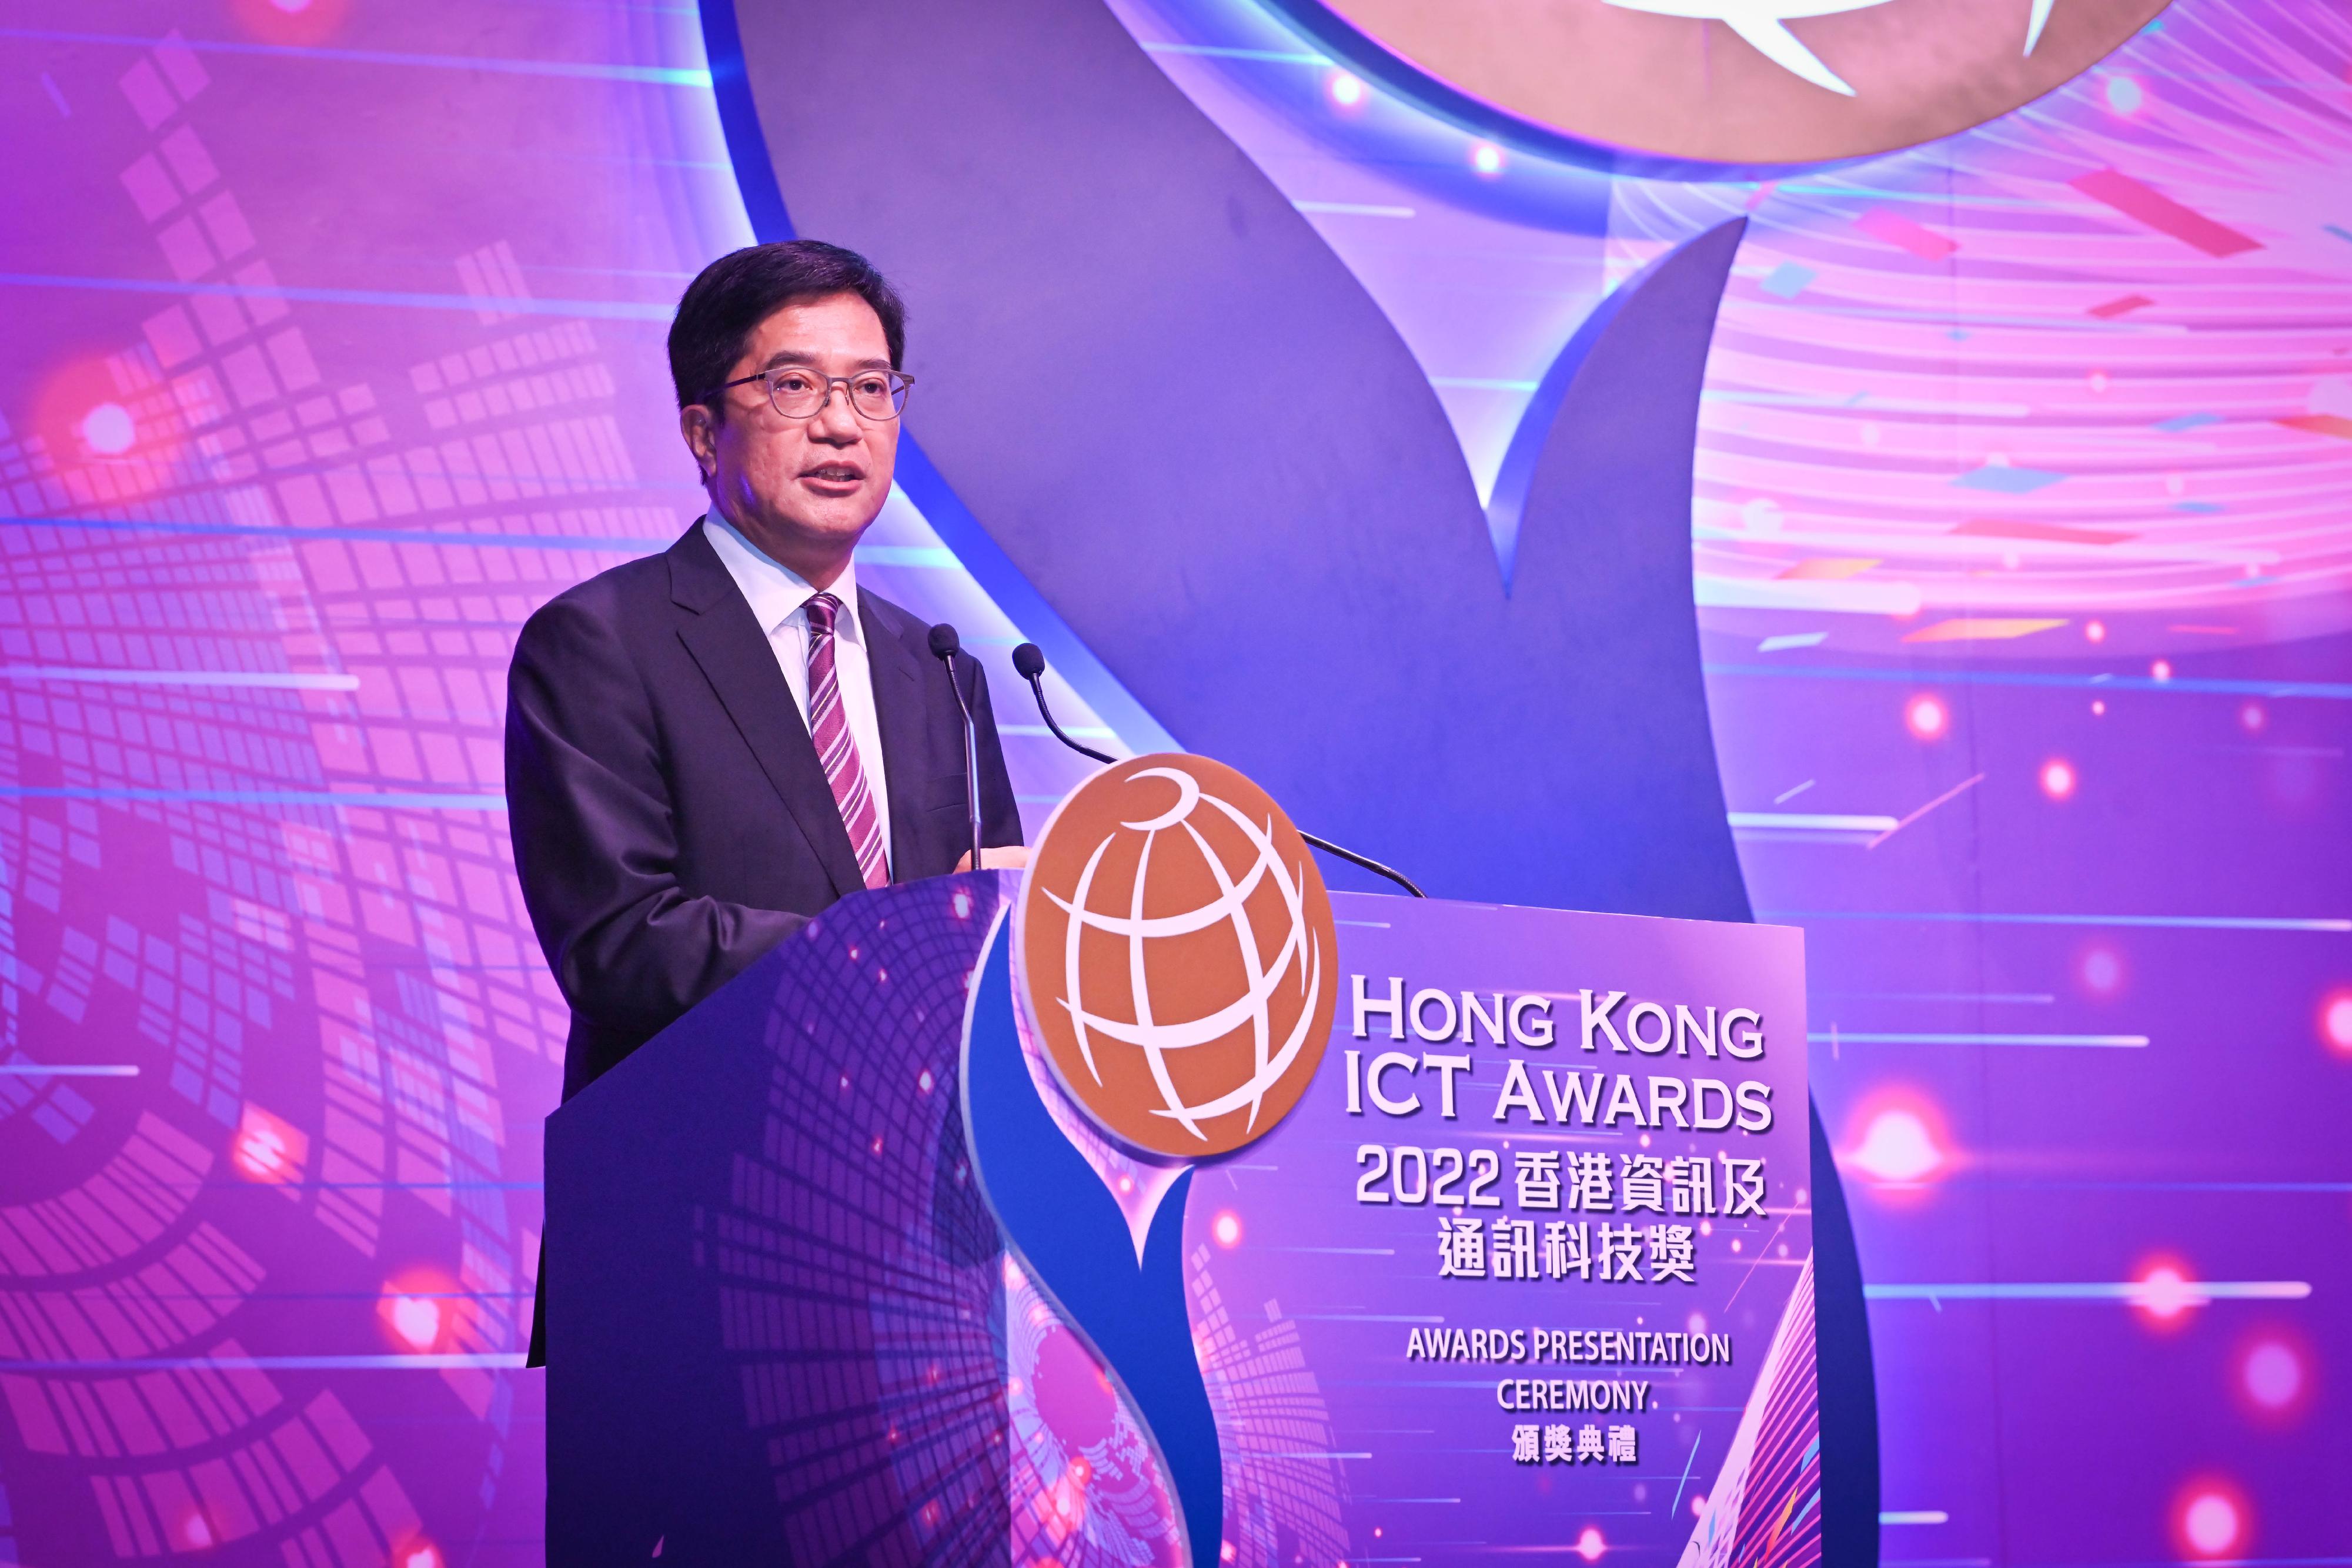 The Acting Financial Secretary, Mr Michael Wong, delivers the opening remarks at the Hong Kong ICT Awards 2022 Awards Presentation Ceremony this evening (November 16).